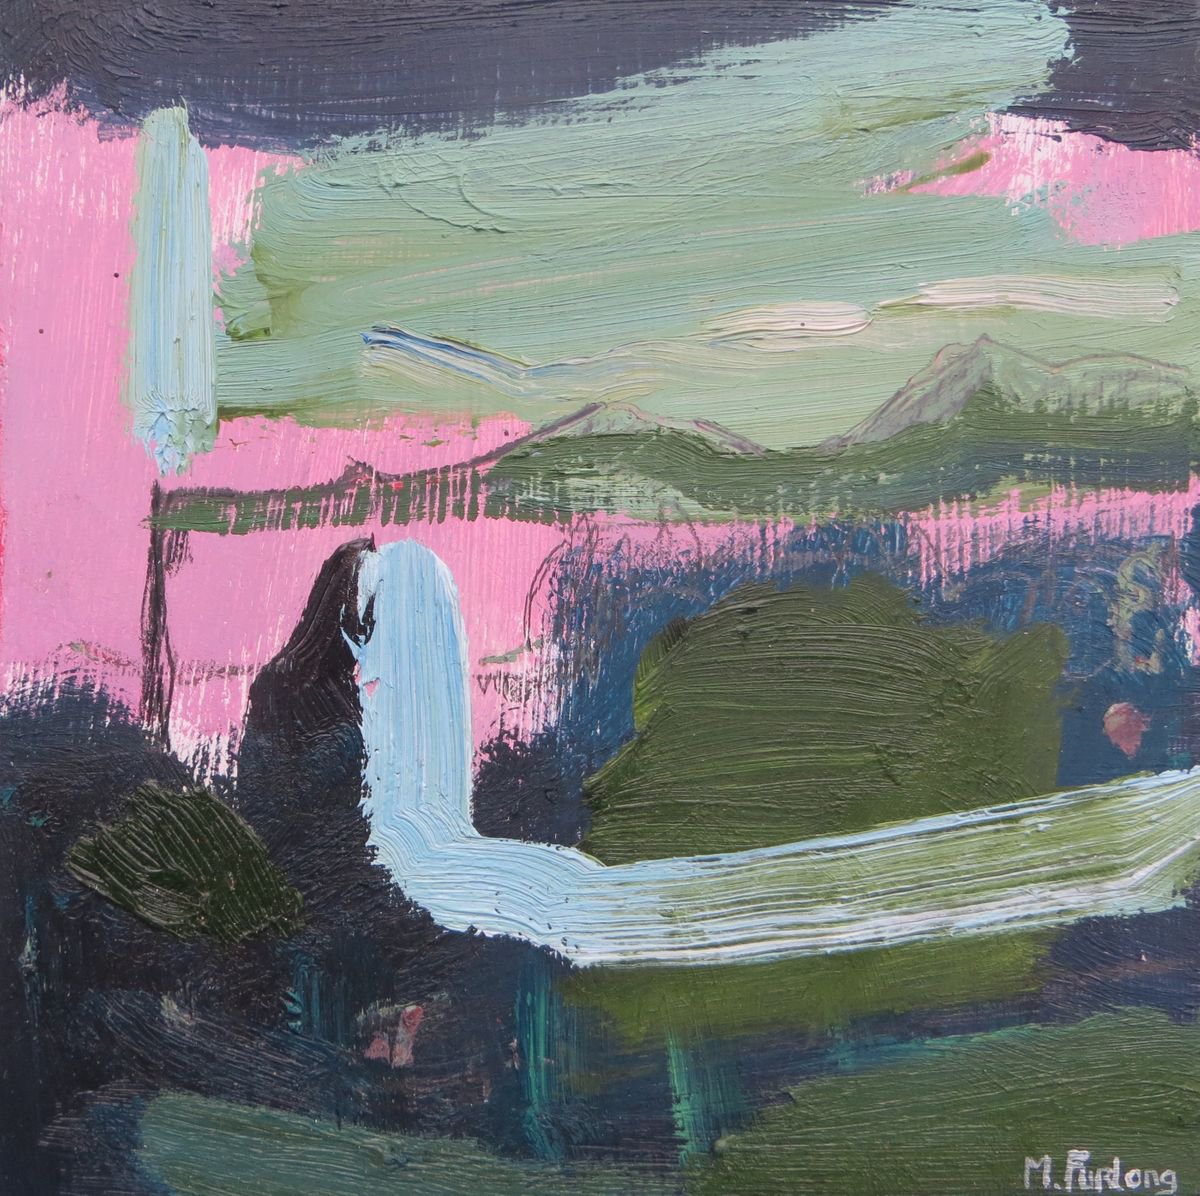 With Pink, Black And Green (Internal World Study 6) - Original oil painting on wood by Martina Furlong